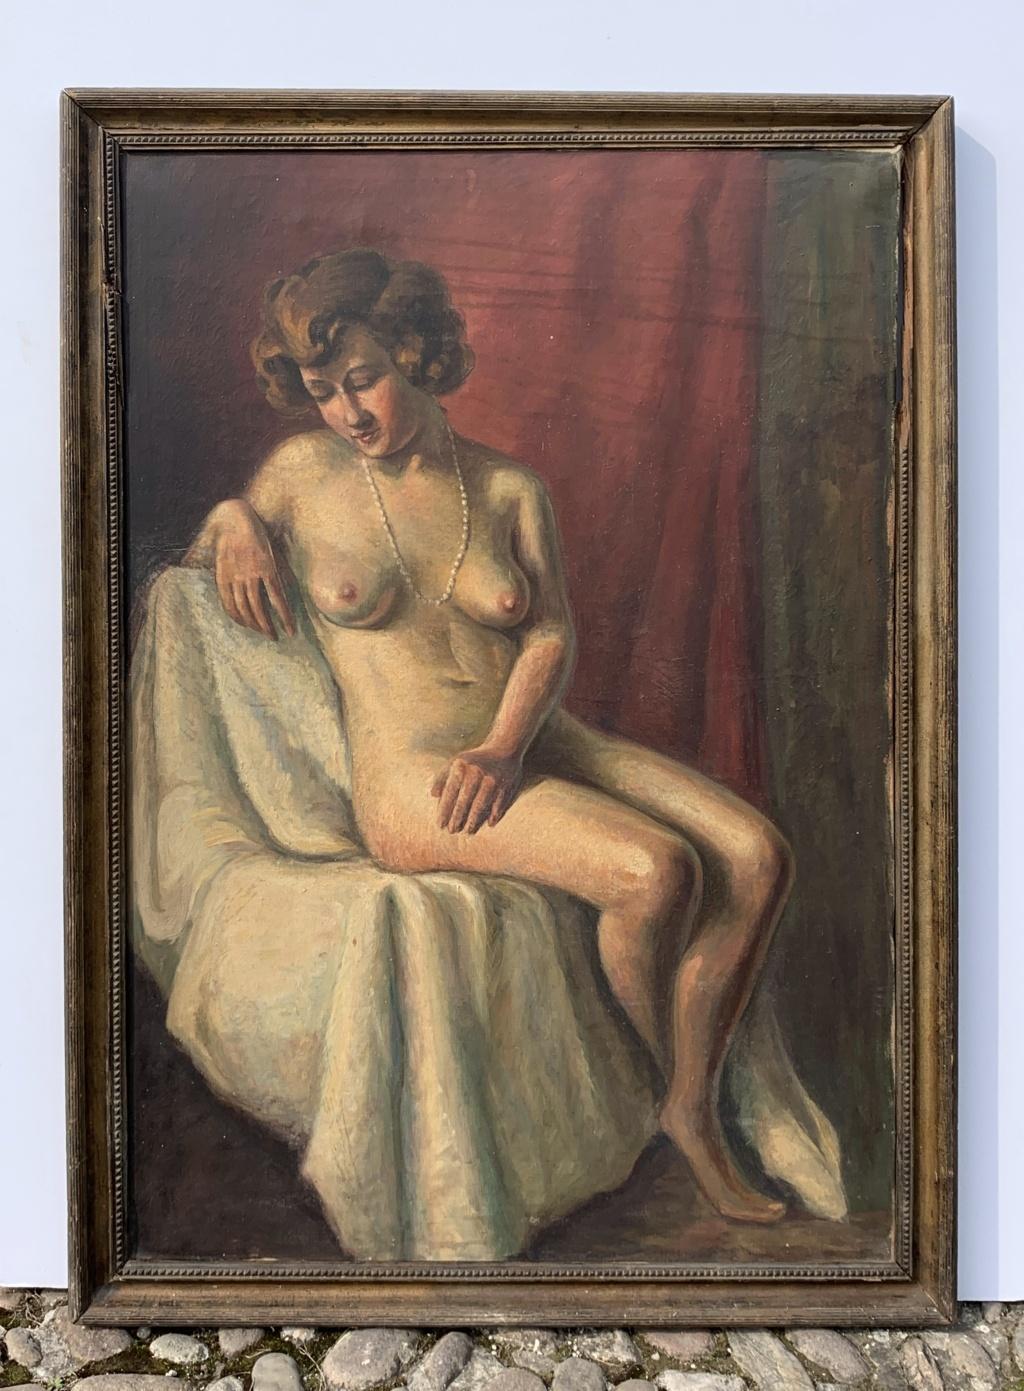 French nudes painter - 20th century figure painting - Oil on canvas Paris - Painting by Unknown